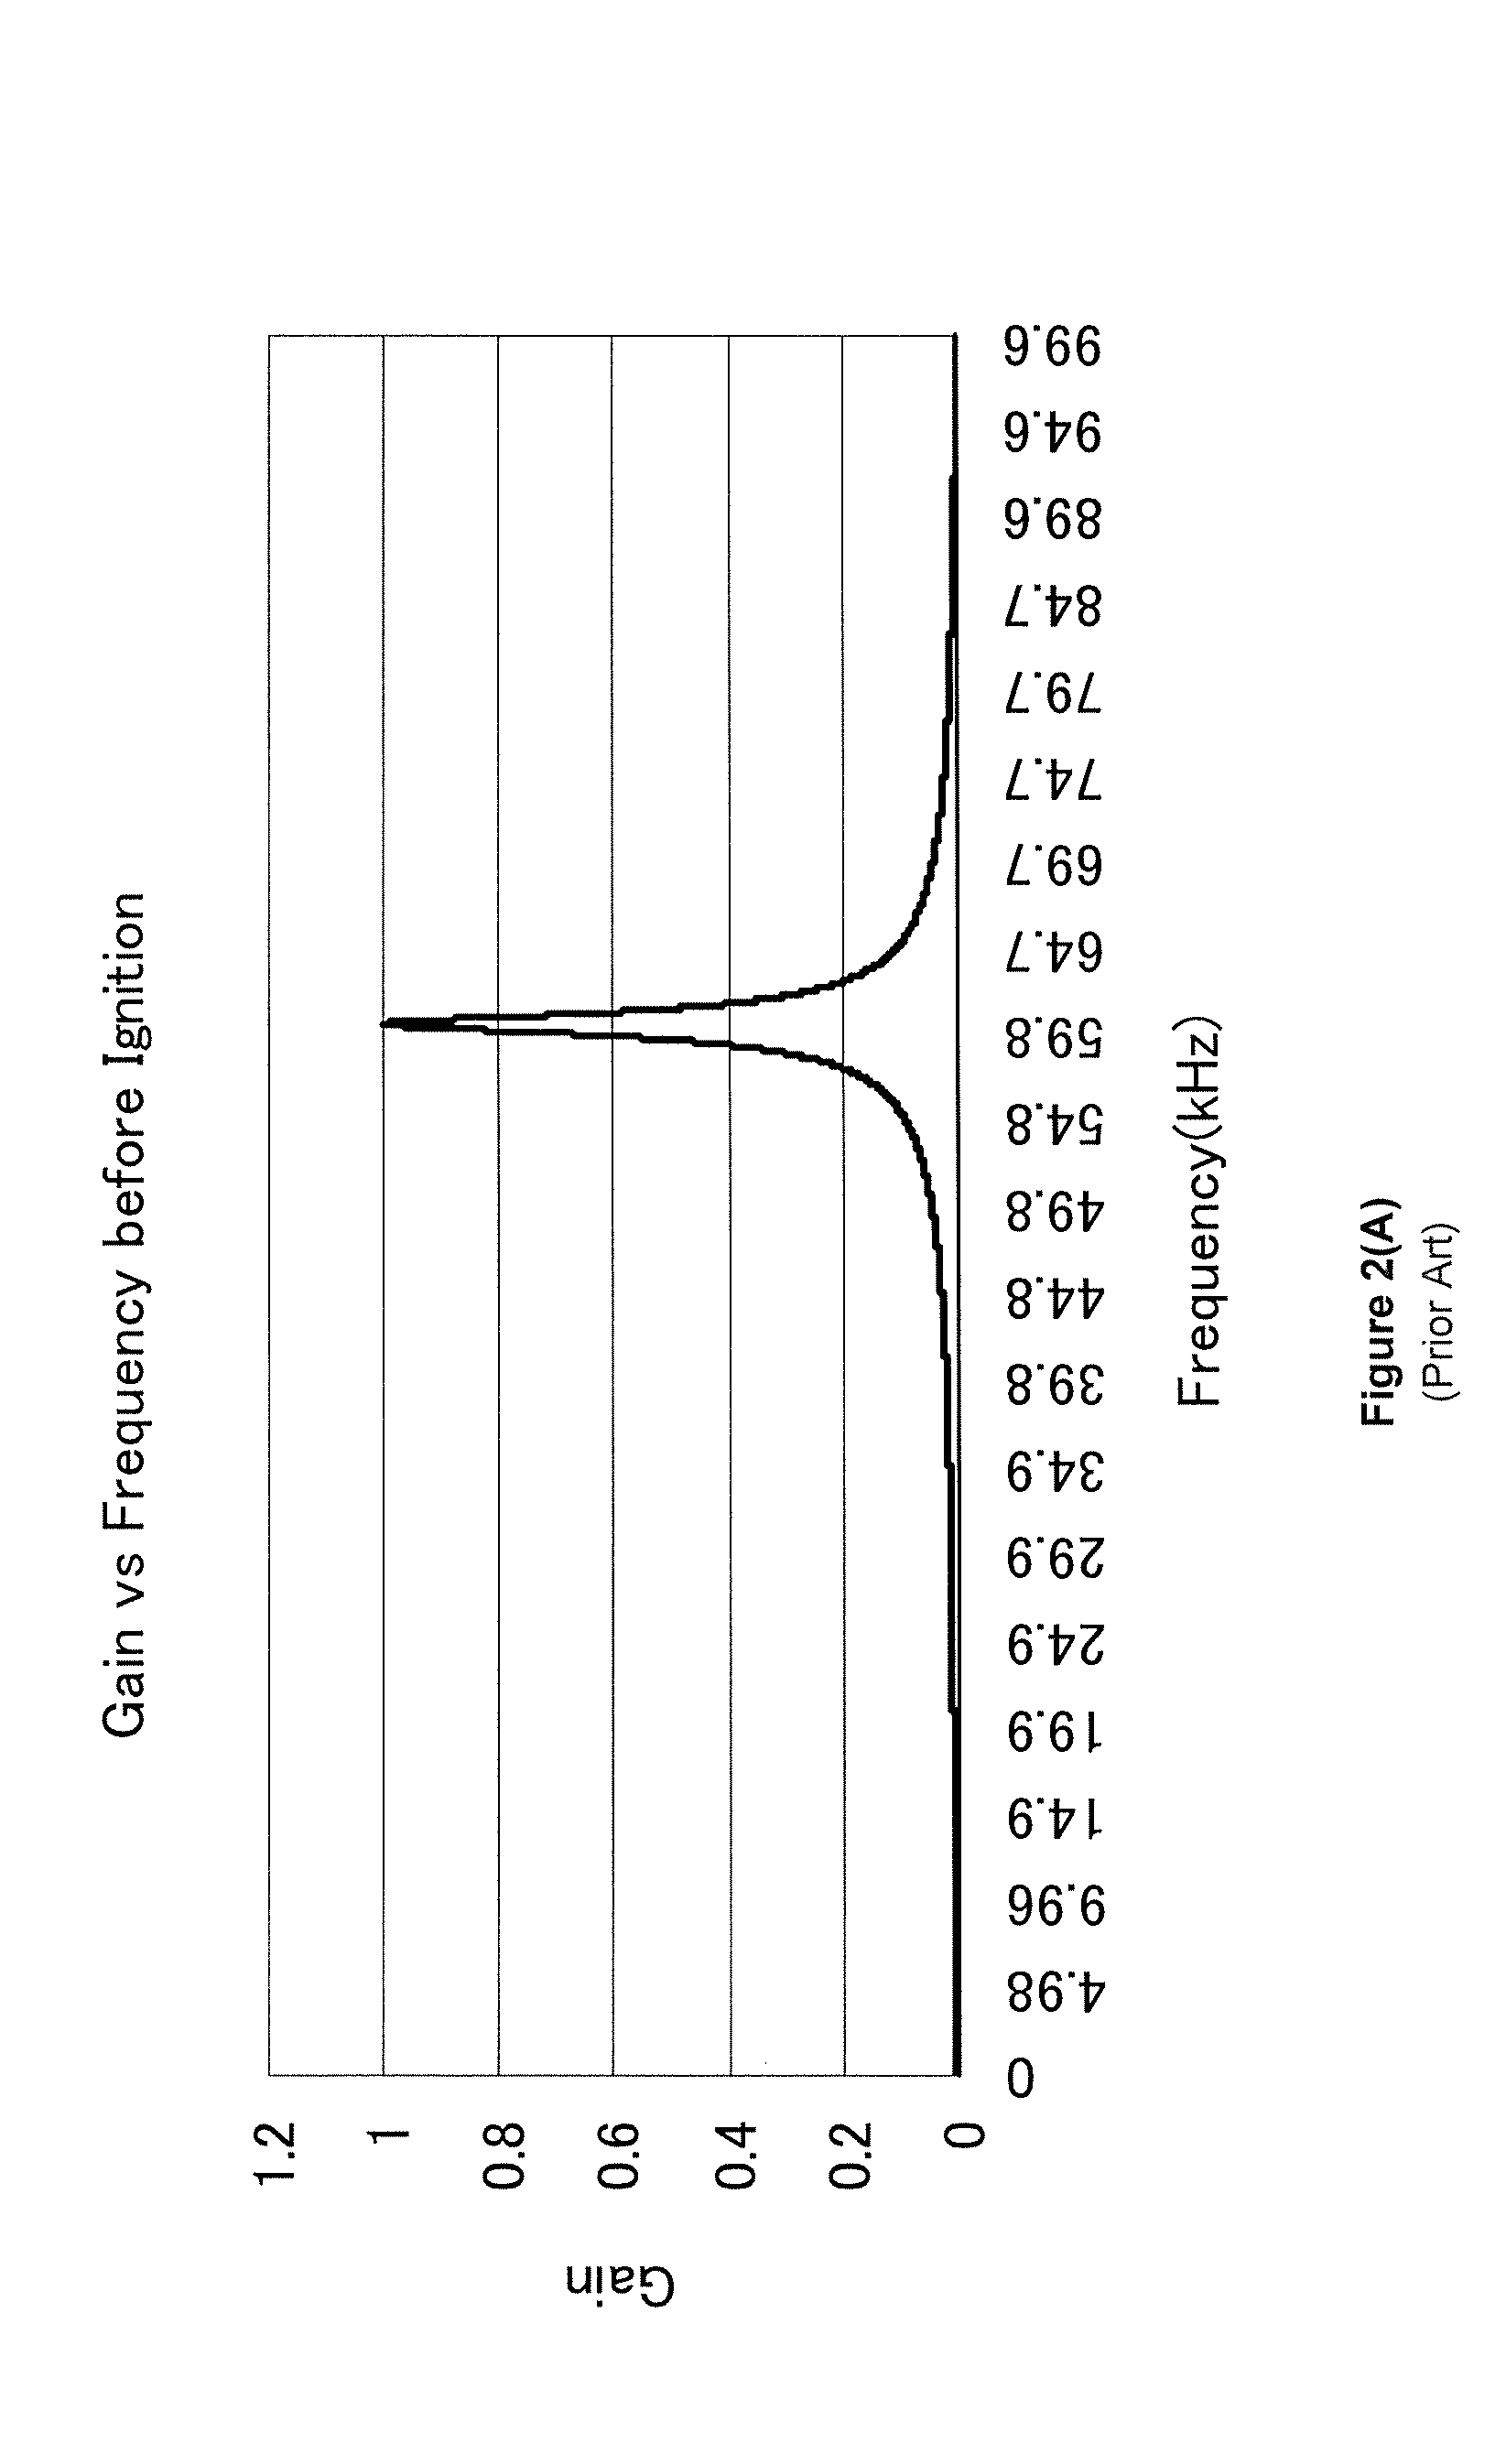 Systems and methods for intelligent control of cold-cathode fluorescent lamps